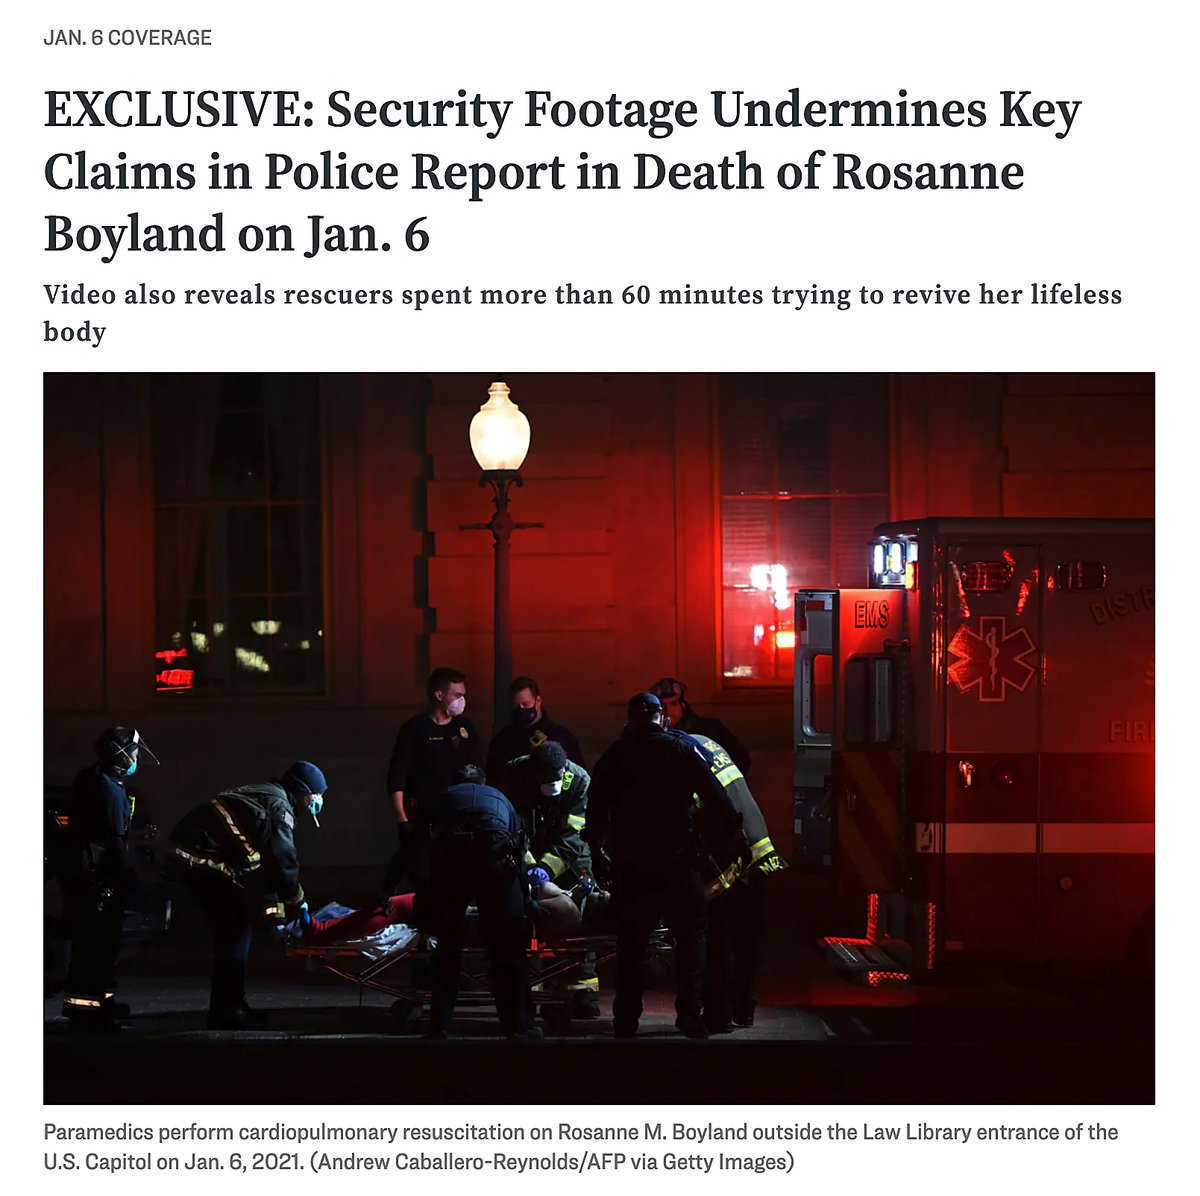 Video investigation provides a new look at the tragic death of #RosanneBoyland on #Jan6. theepochtimes.com/us/exclusive-s…